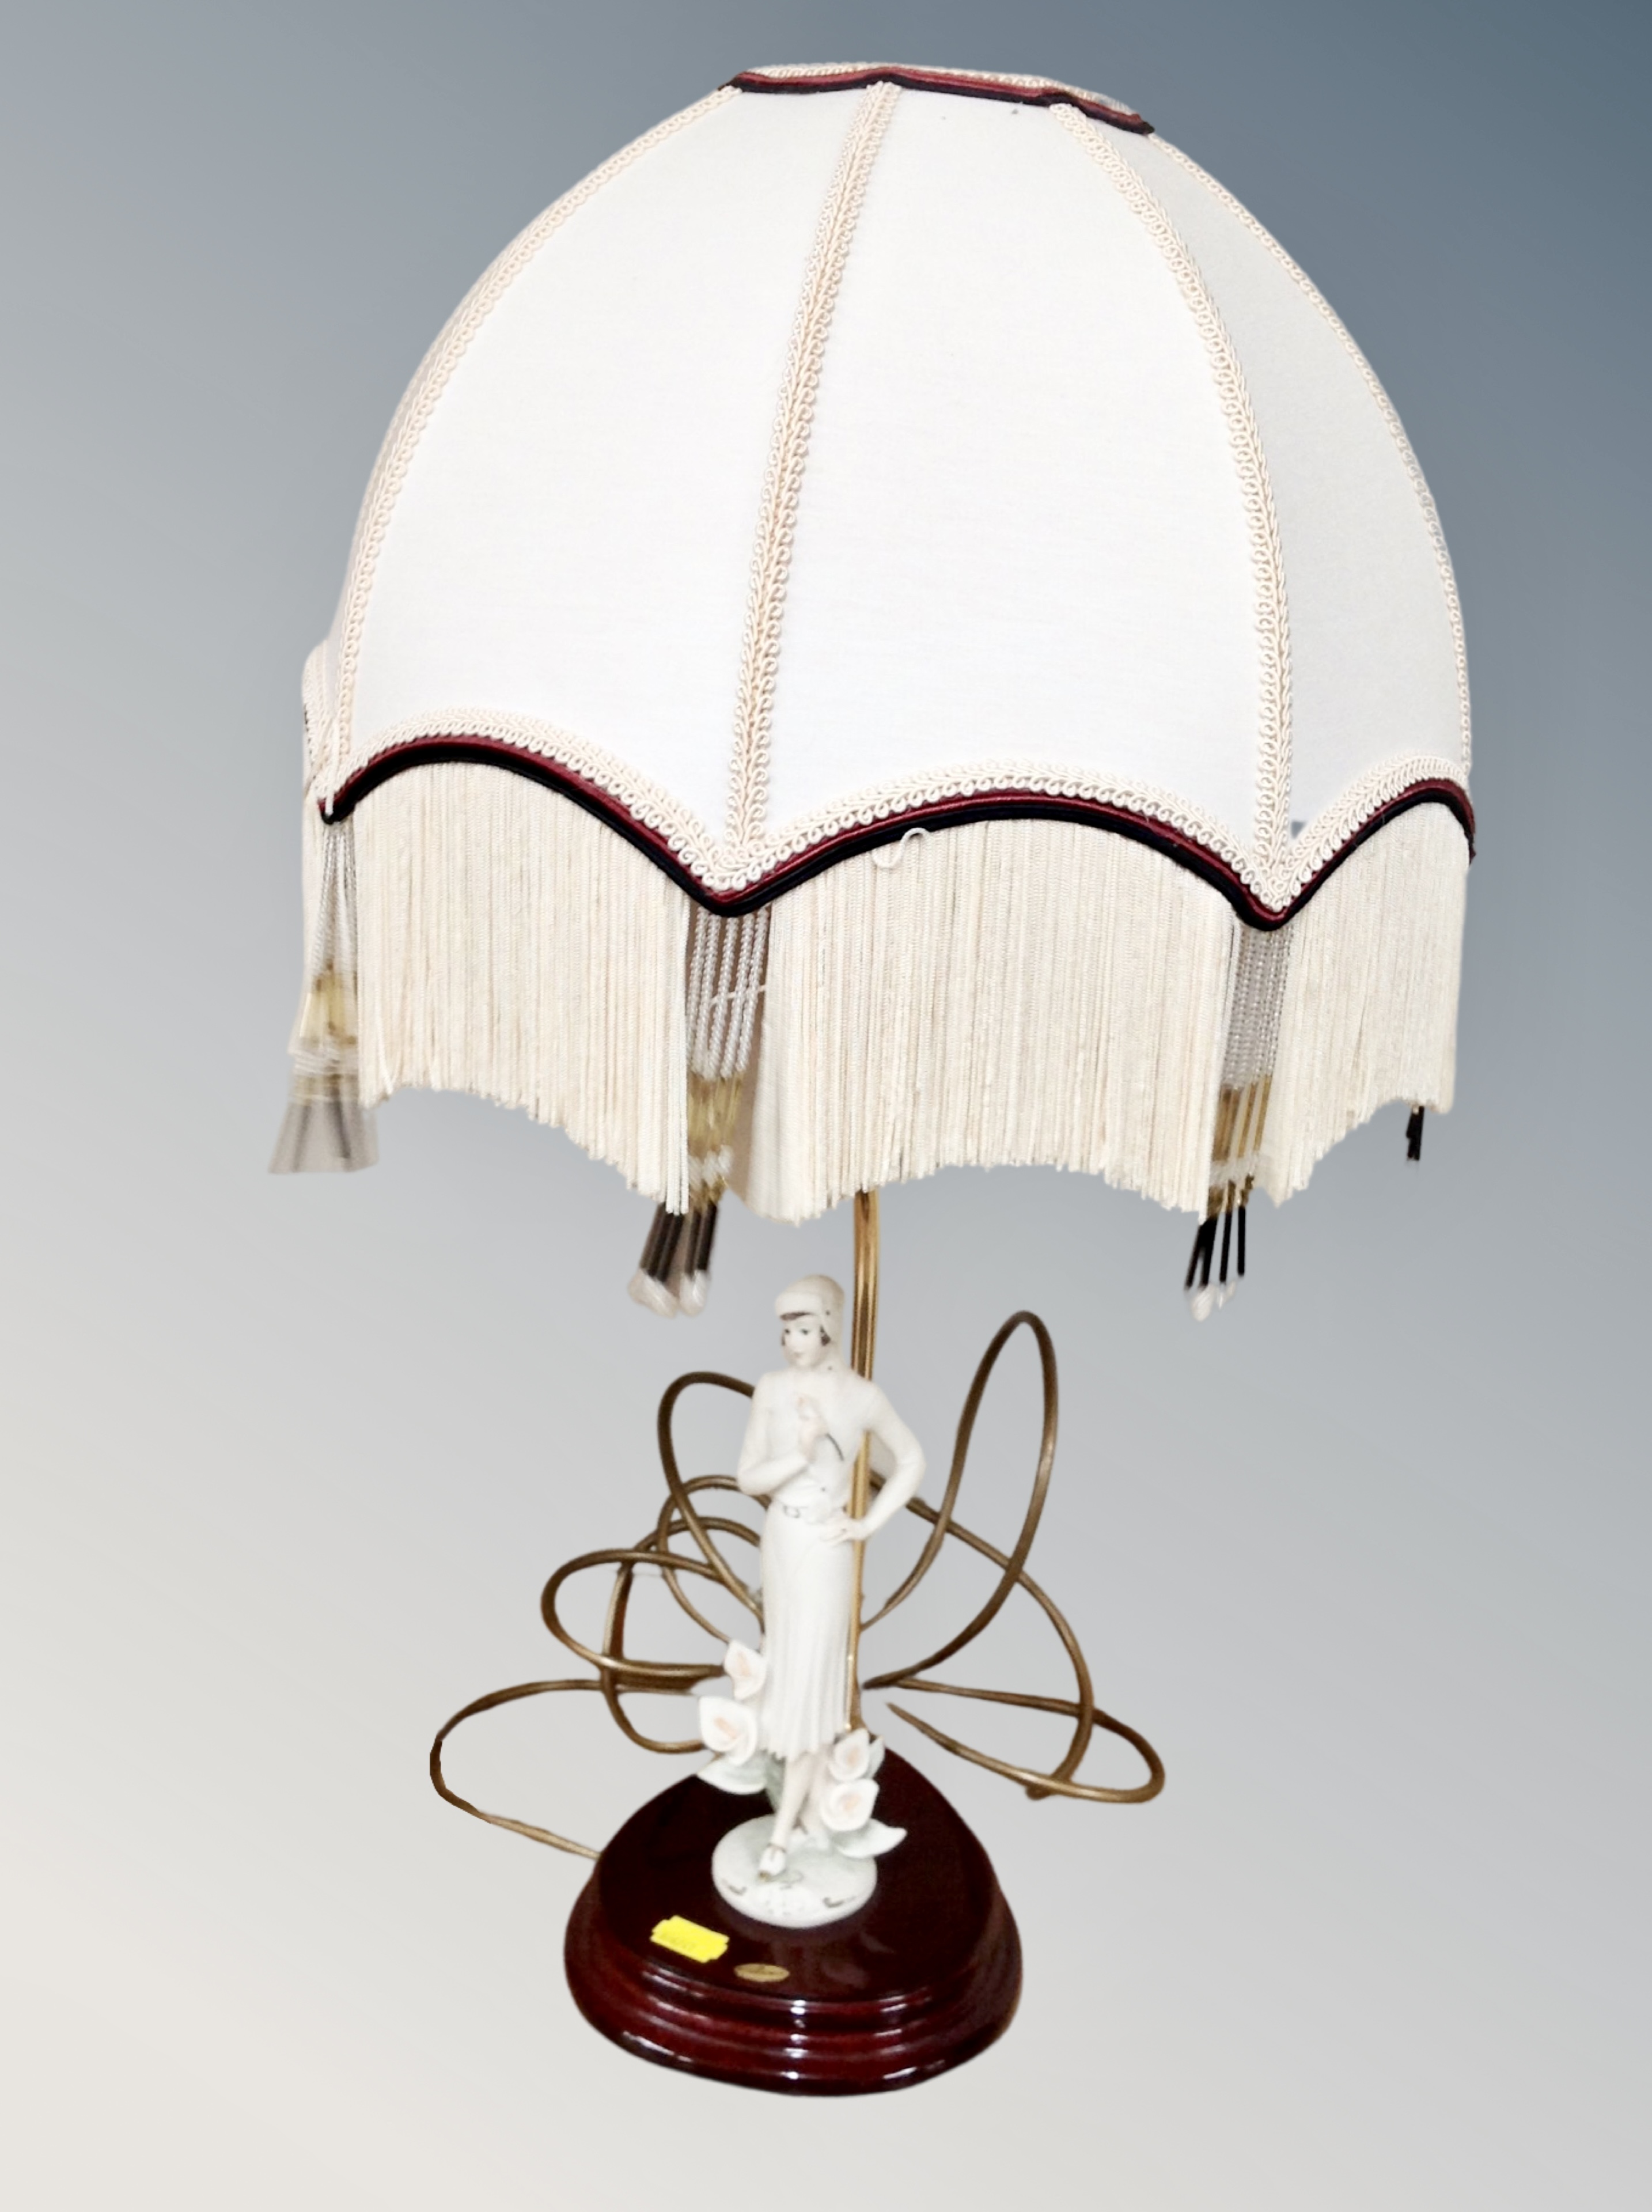 A Florence figural table lamp with tasseled shade